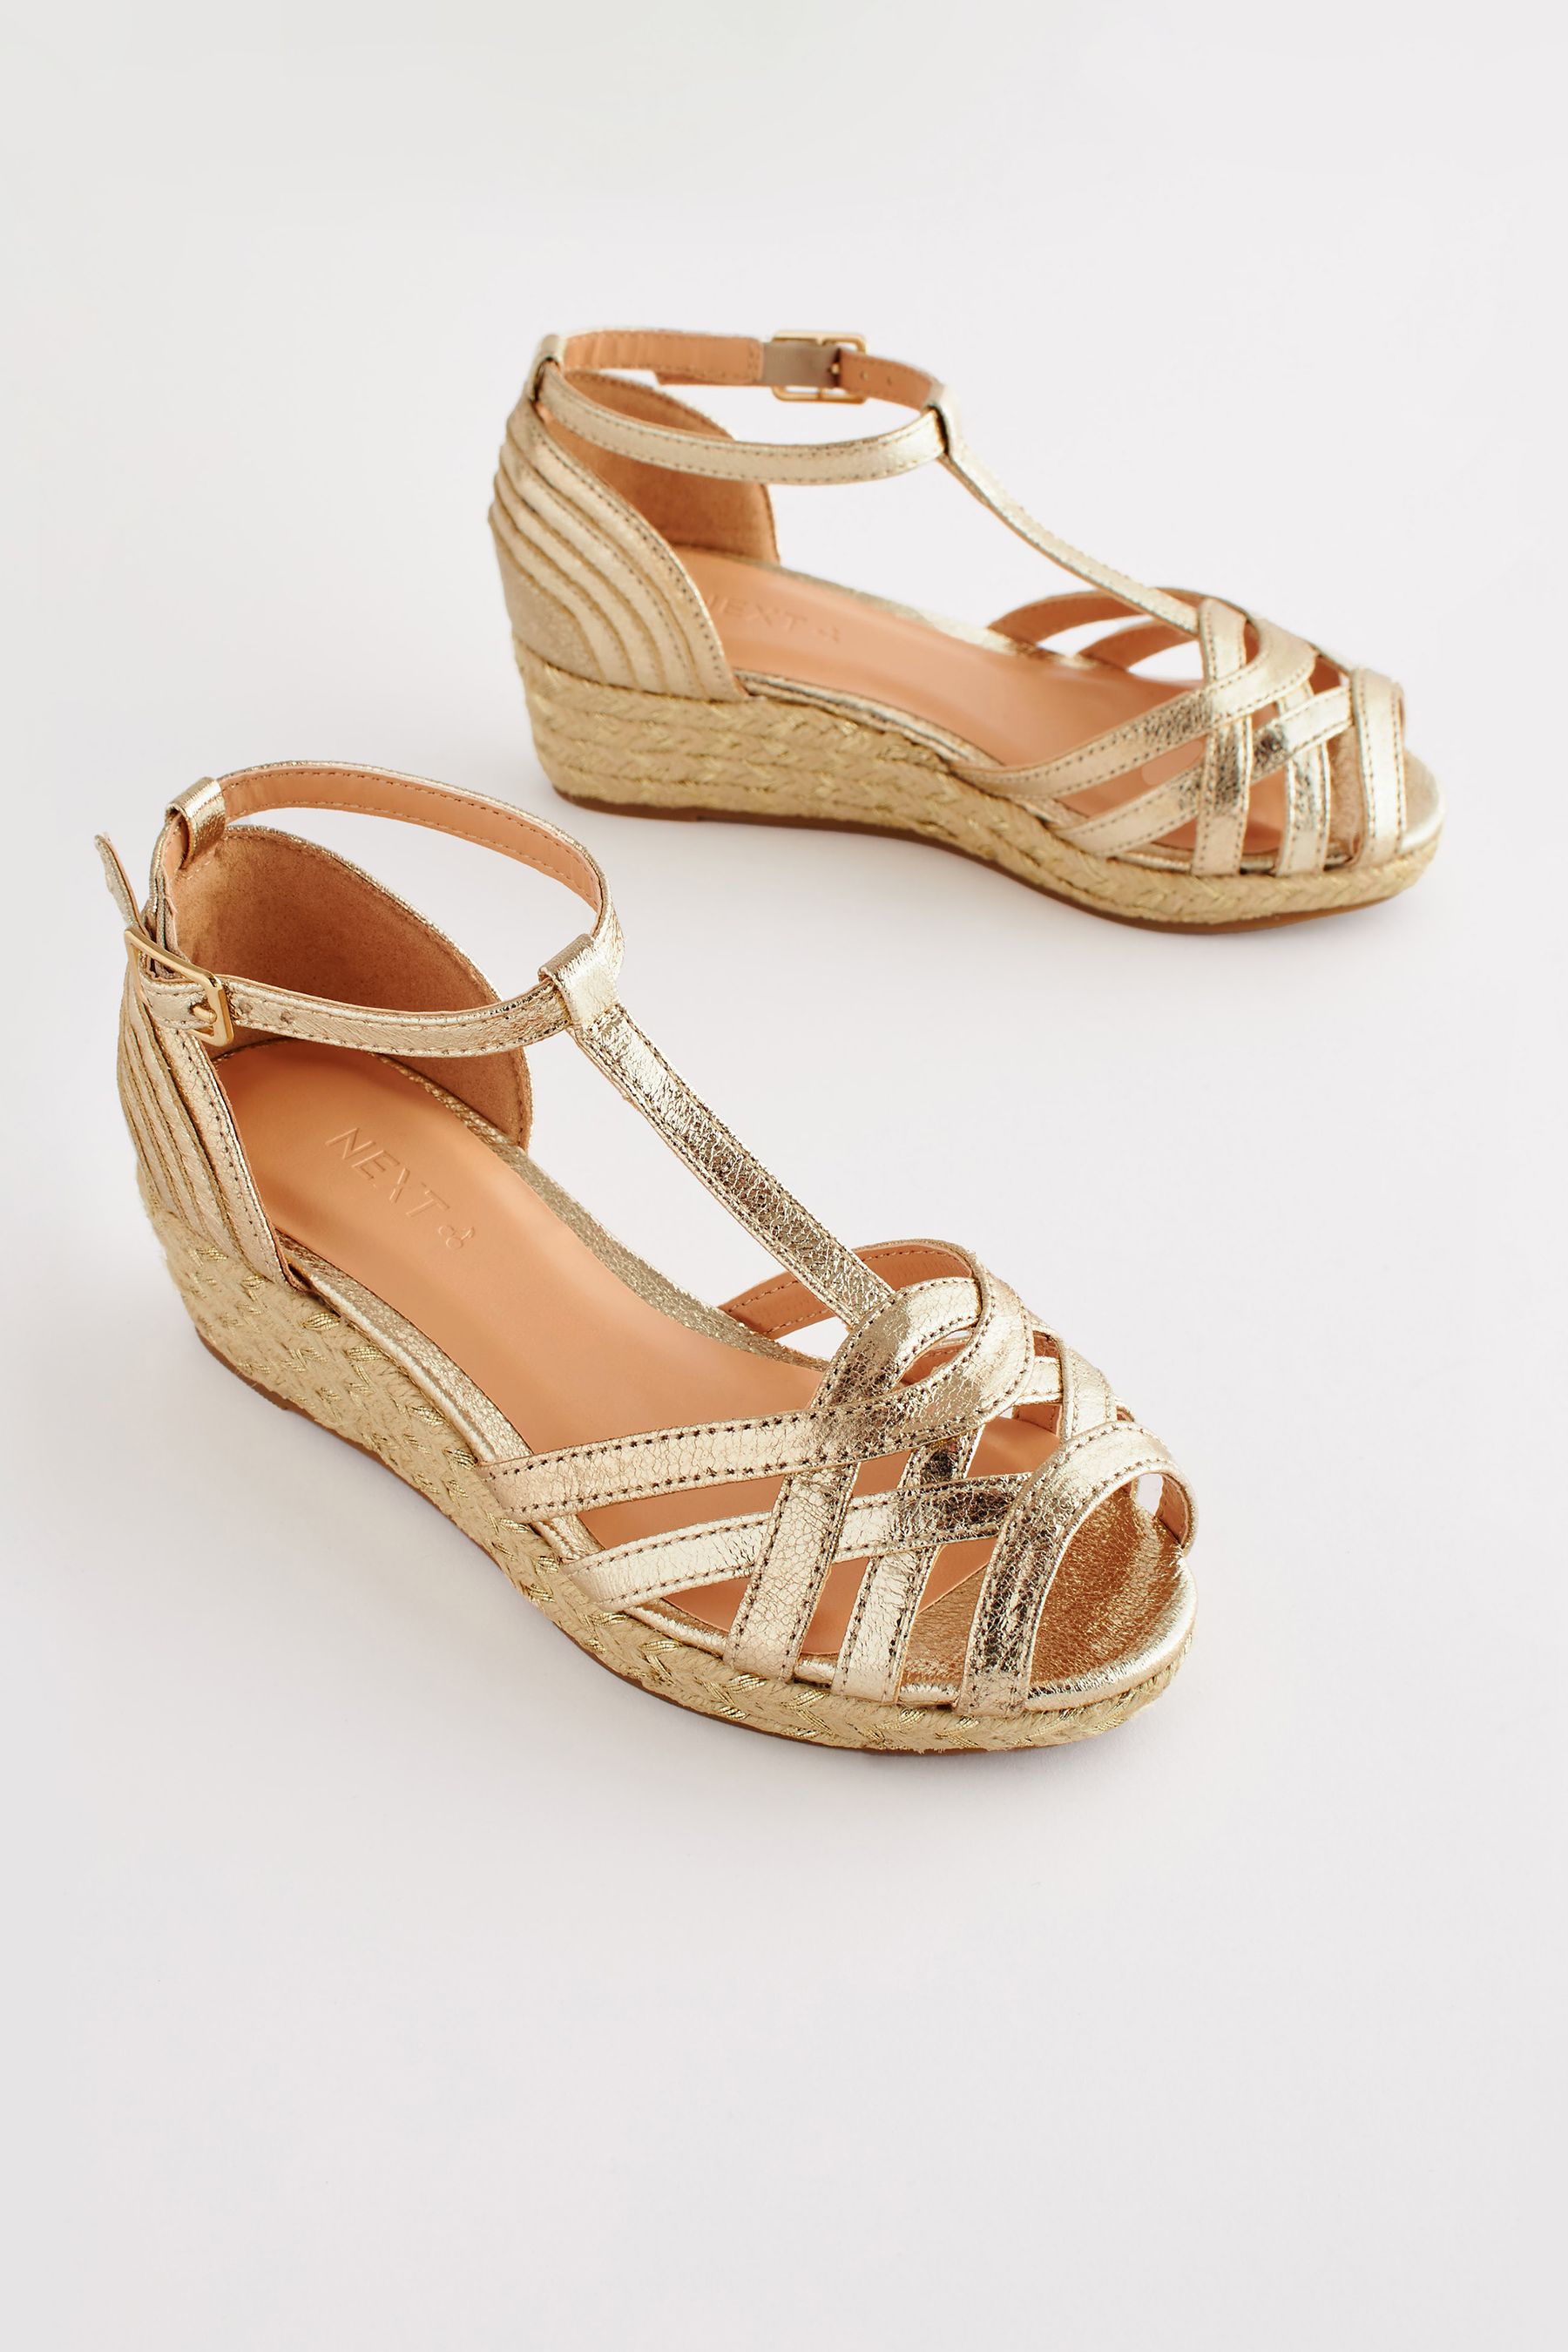 Buy Gold Metallic Woven Wedge Sandals from the Next UK online shop